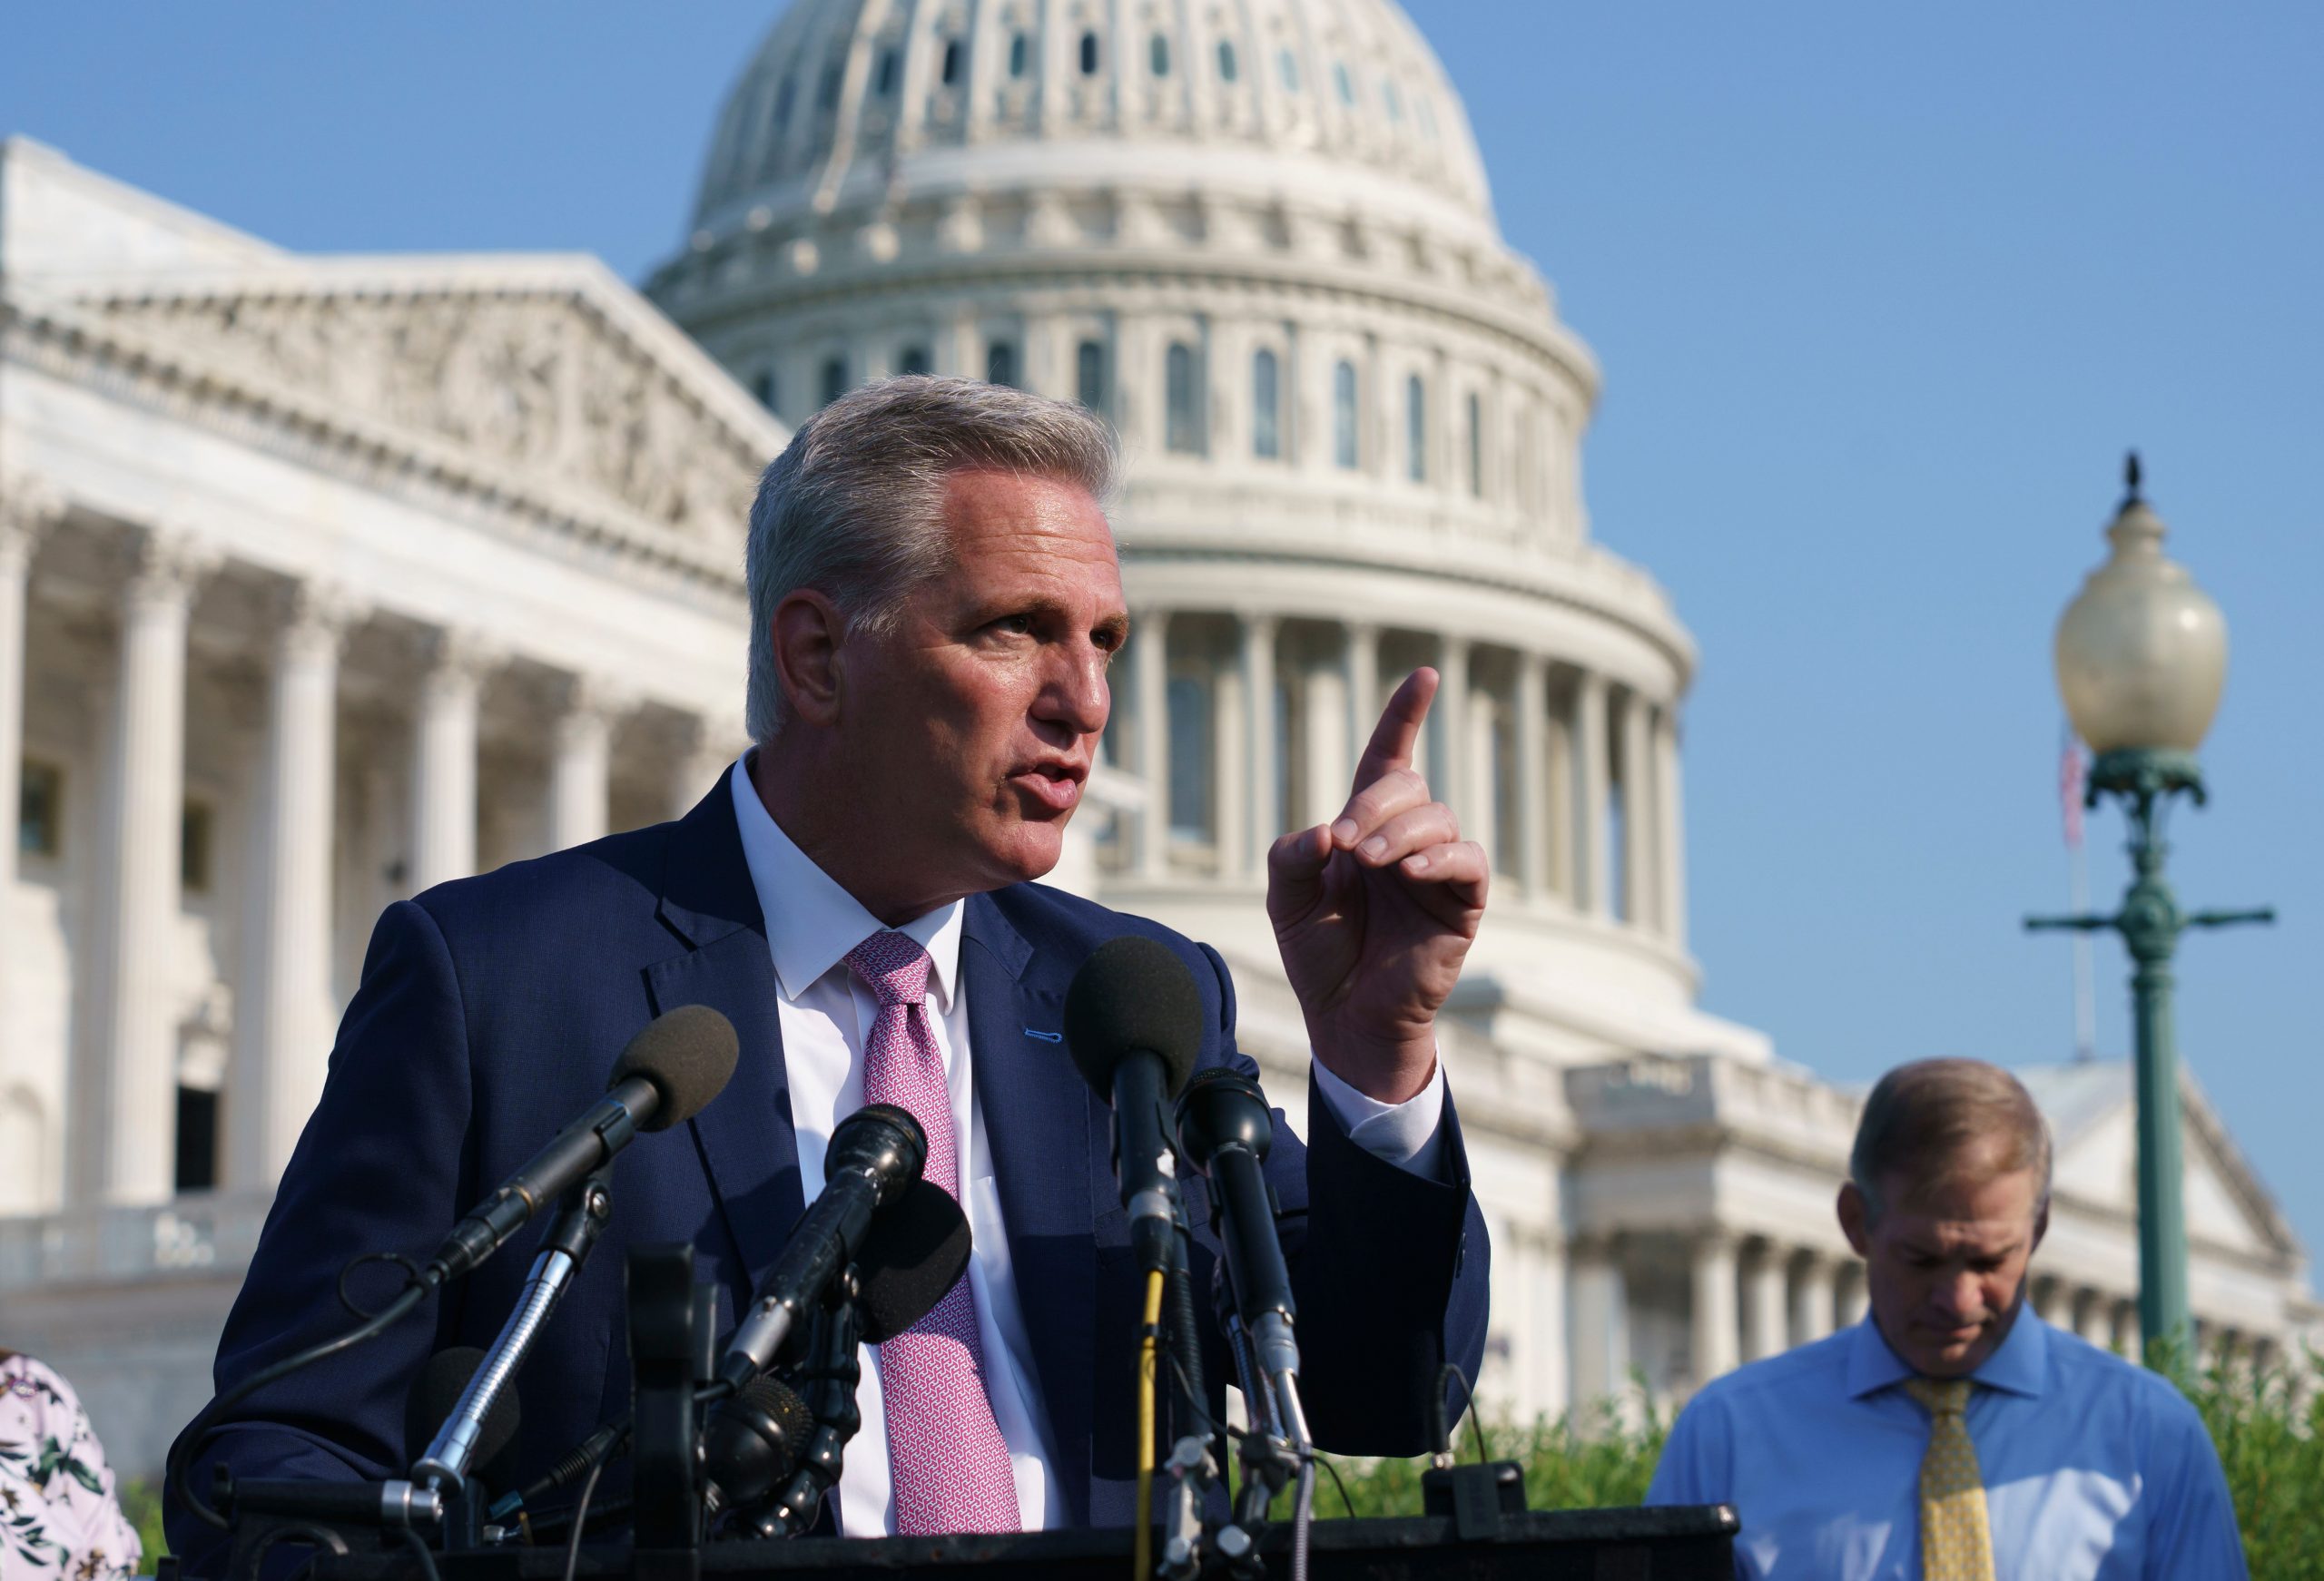 Kevin McCarthy, GOP lawmakers escalate standoff with Jan. 6 House committee